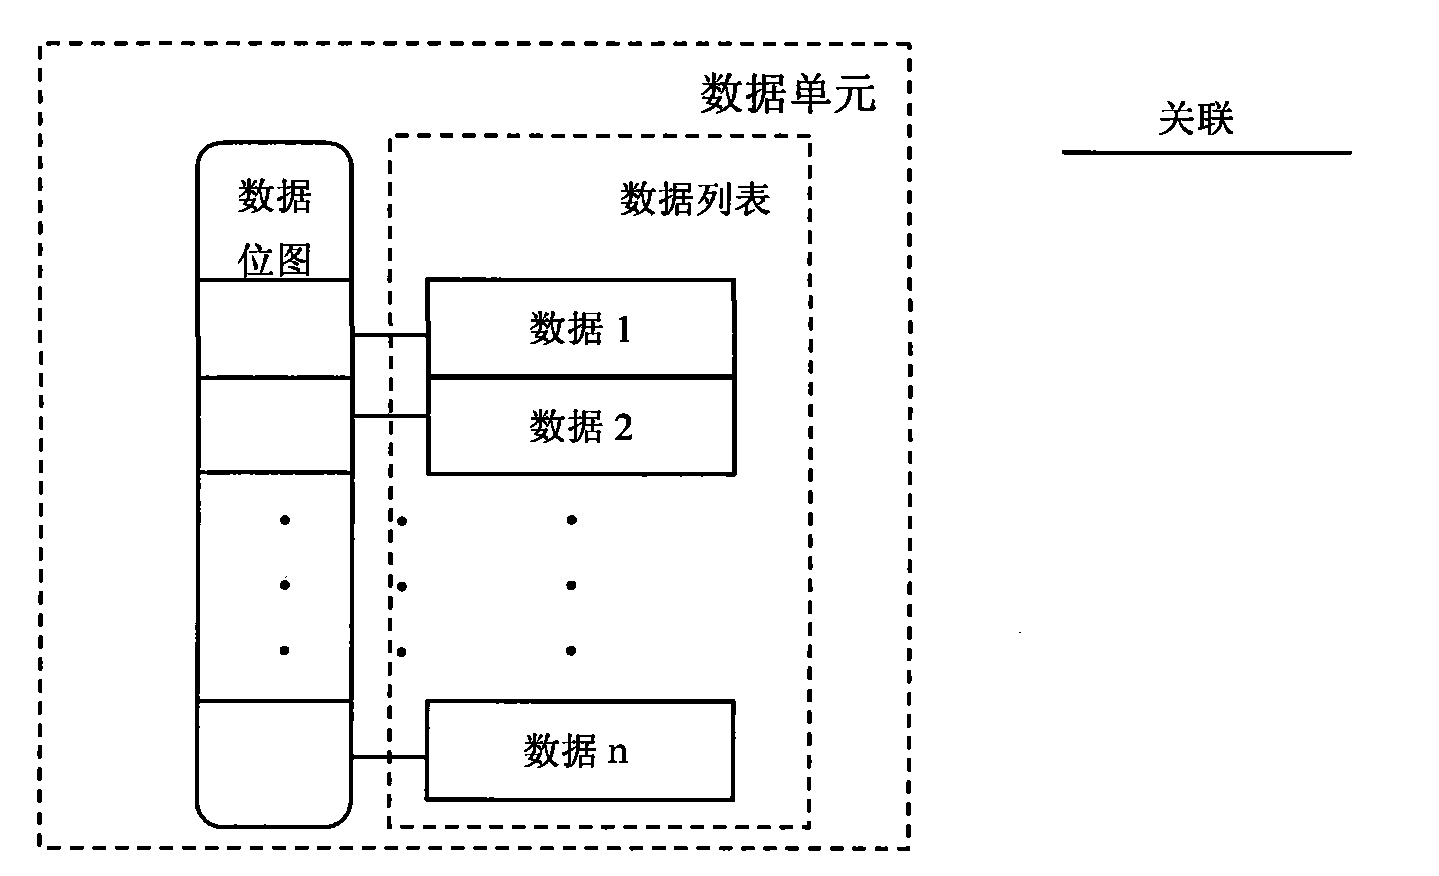 Method for storing real-time database by using similar cluster